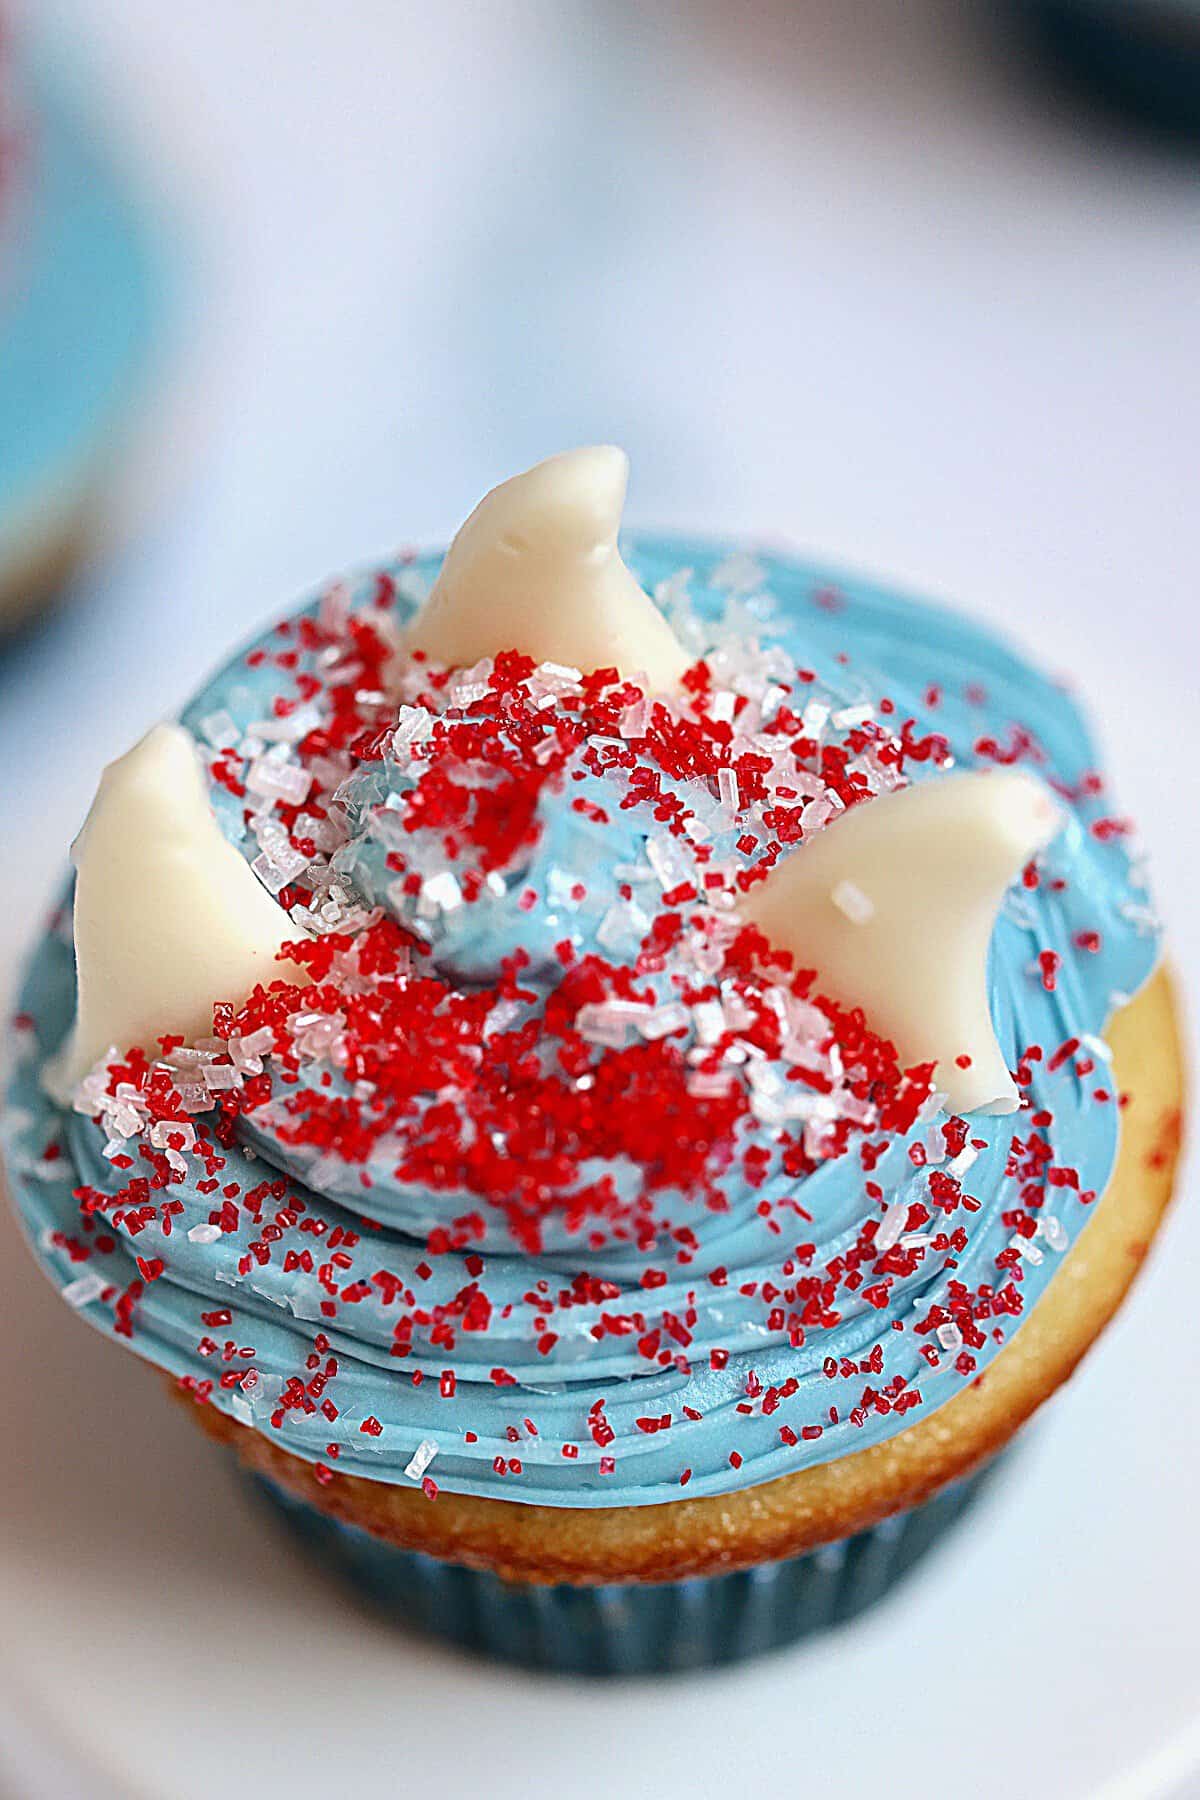 shark cupcake with 3 white shark fins on blue frosting and decorated with red and white sprinkles